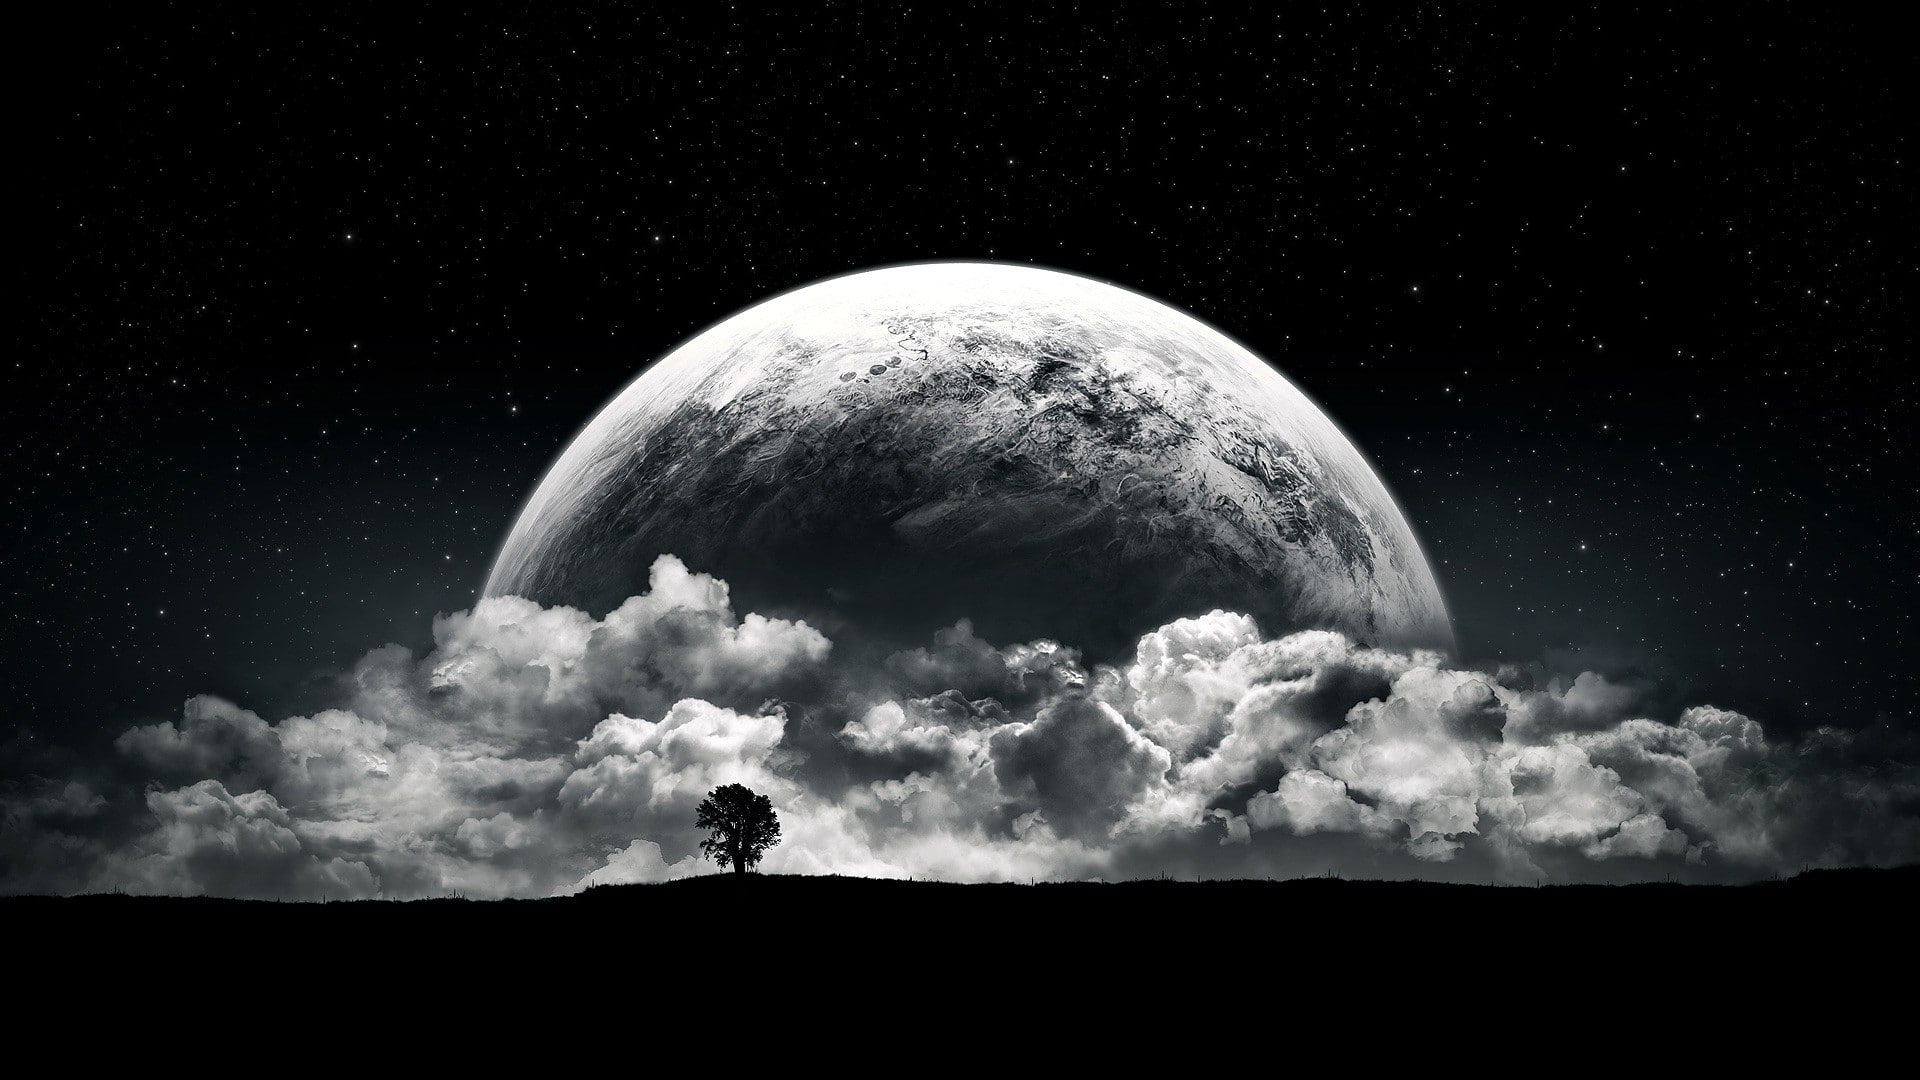 planet, Moon, clouds, stars, night, black, white, space, monochrome